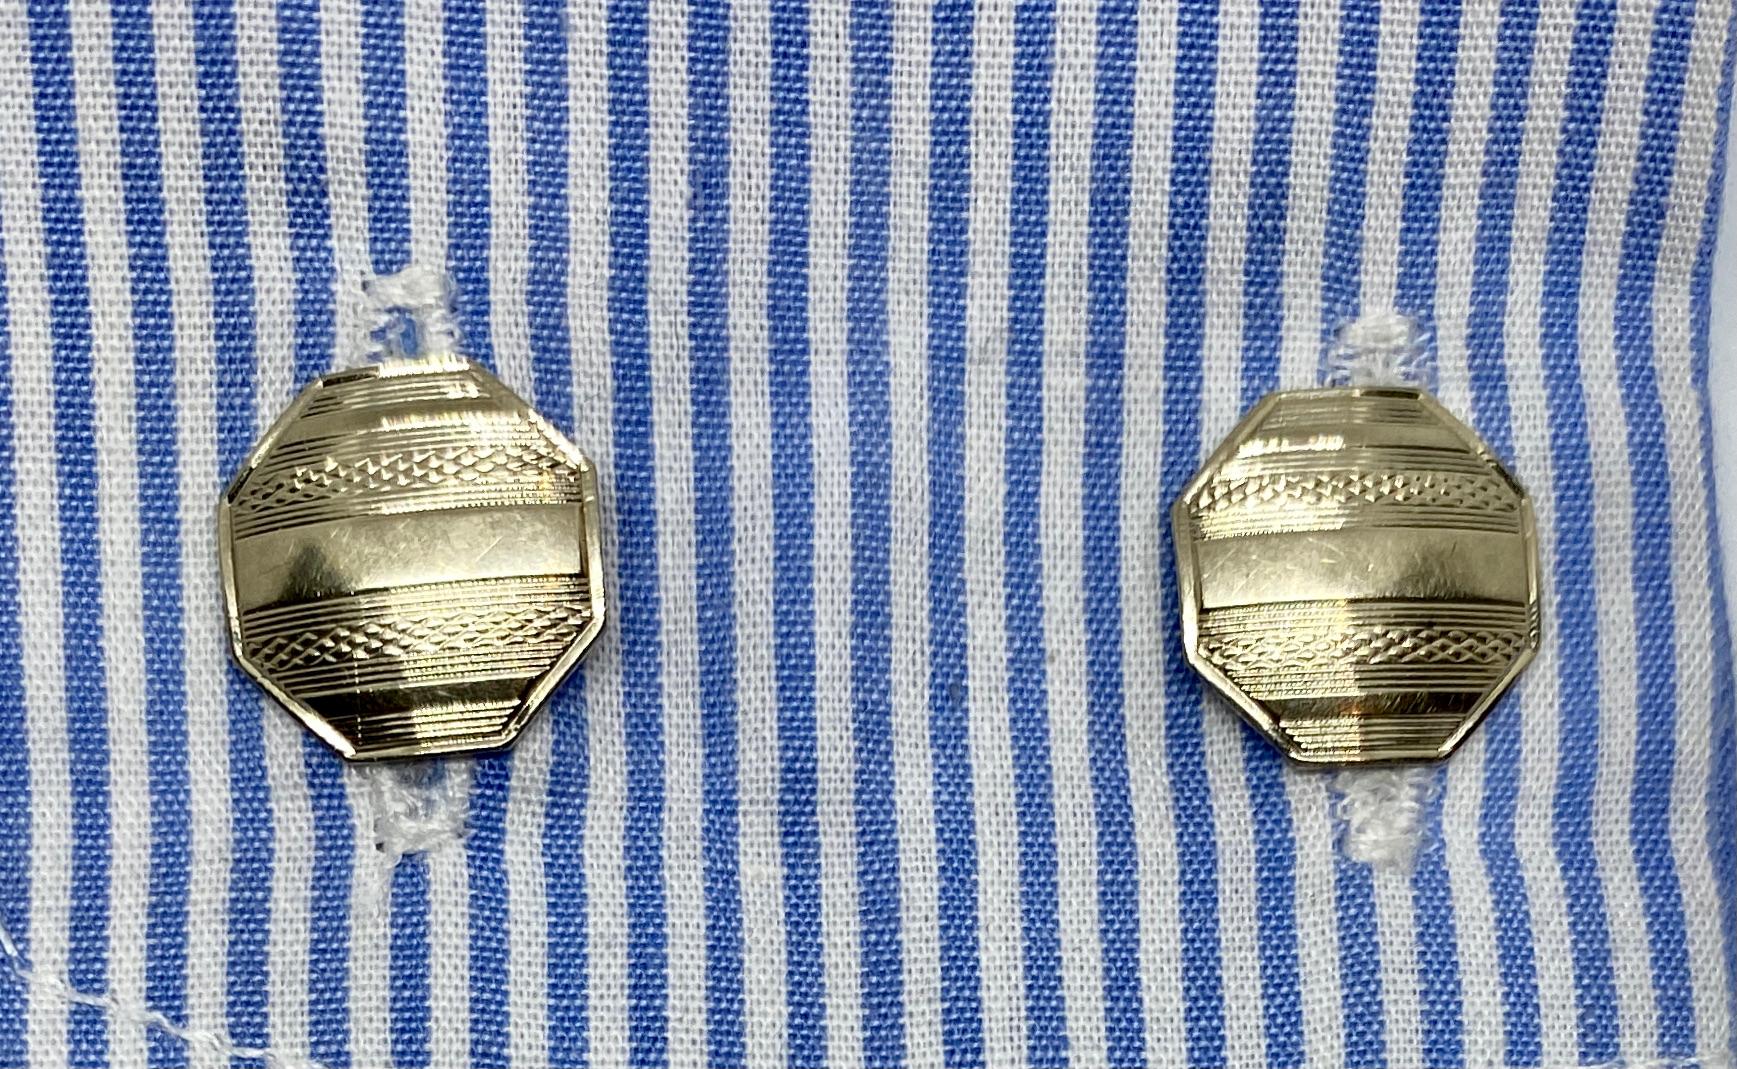 Octagonal Art Deco Cufflinks in White Gold In Good Condition For Sale In San Rafael, CA